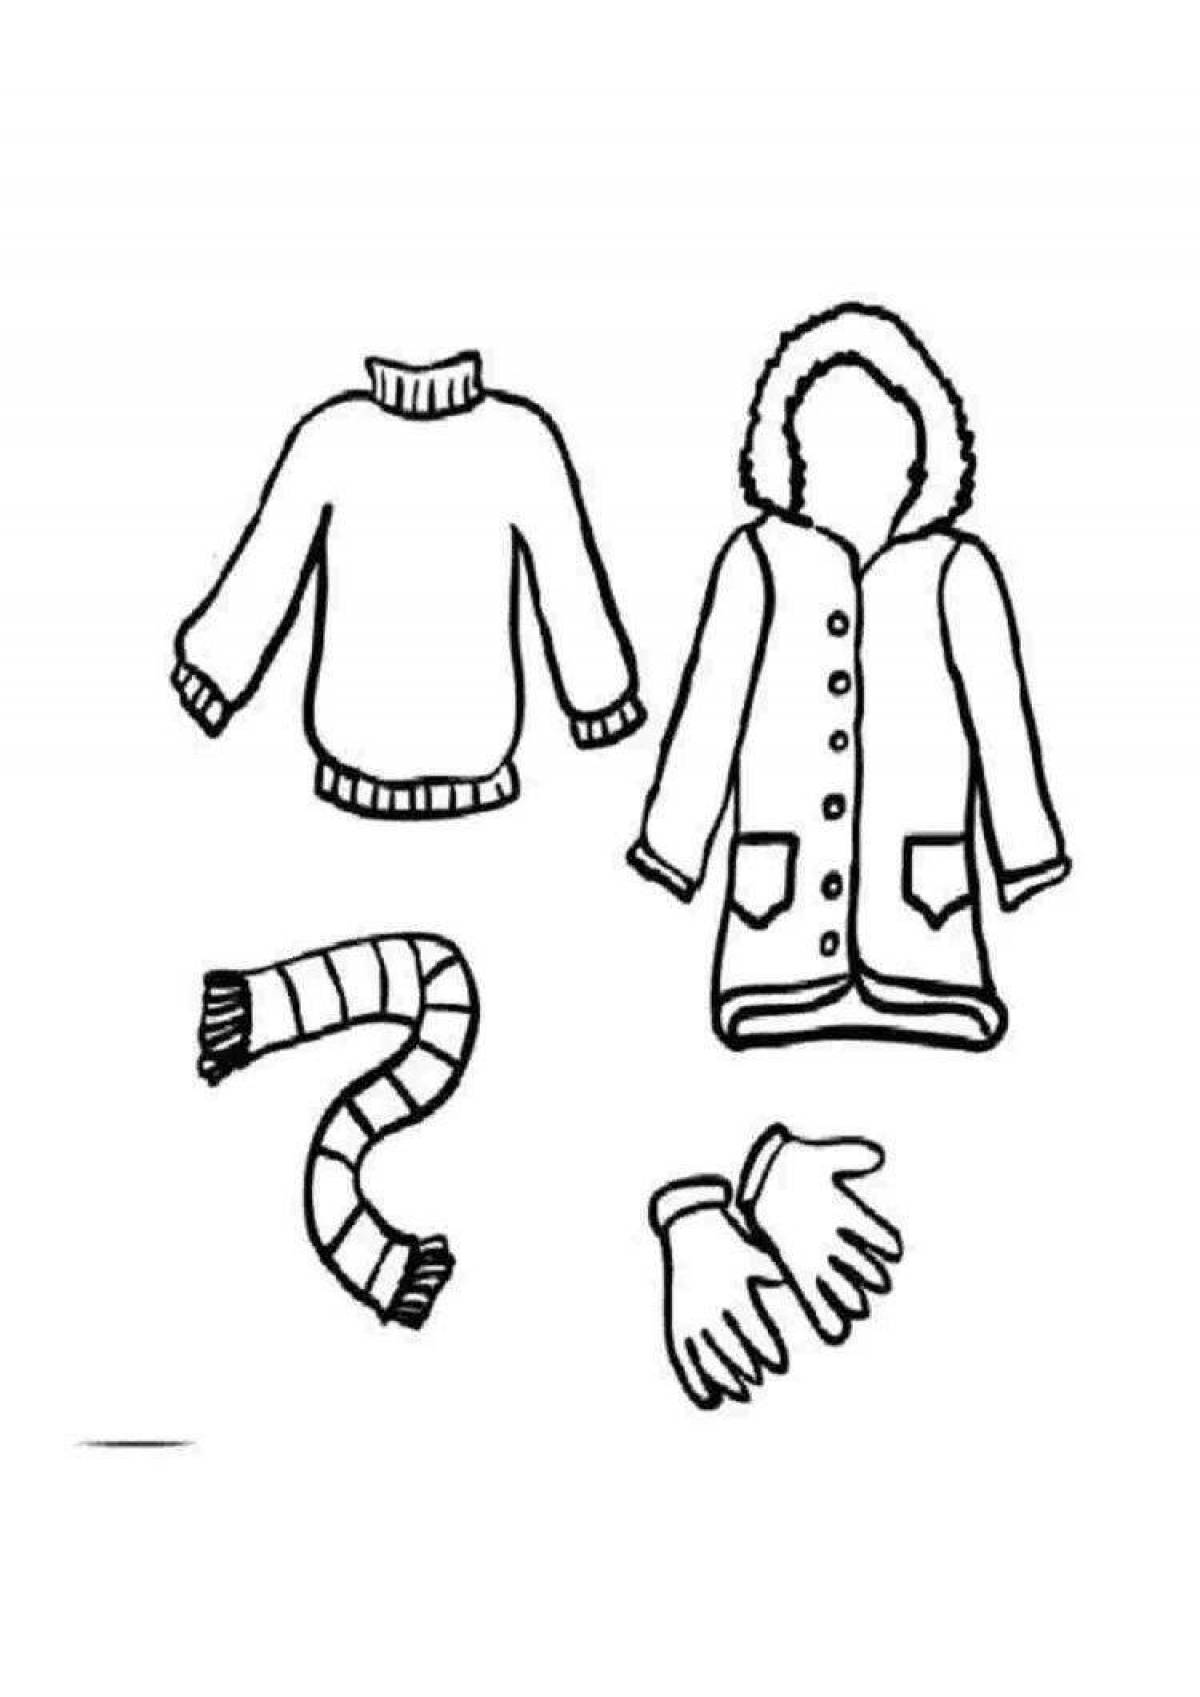 Colorful clothing coloring page for 3-4 year olds